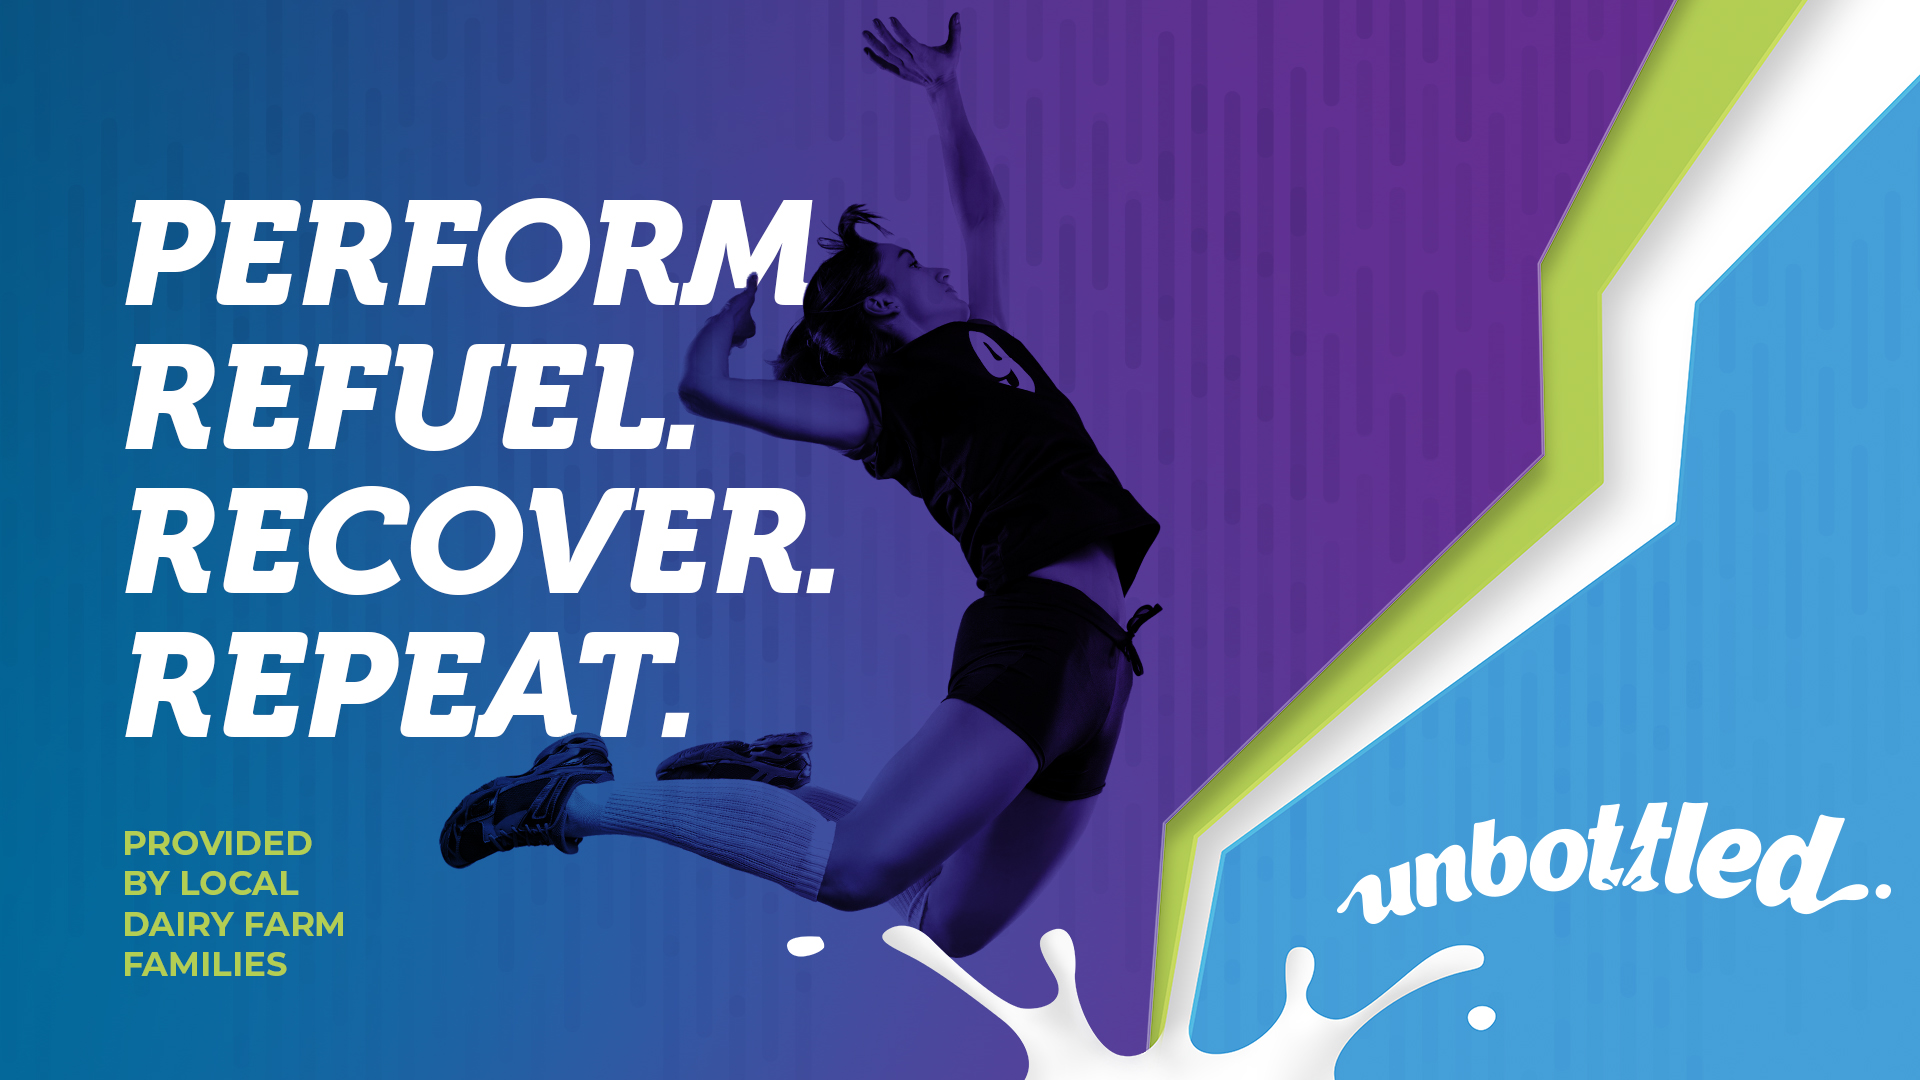 Perform, Refuel, Recover, Repeat. - Milk Provided by local dairy farmers